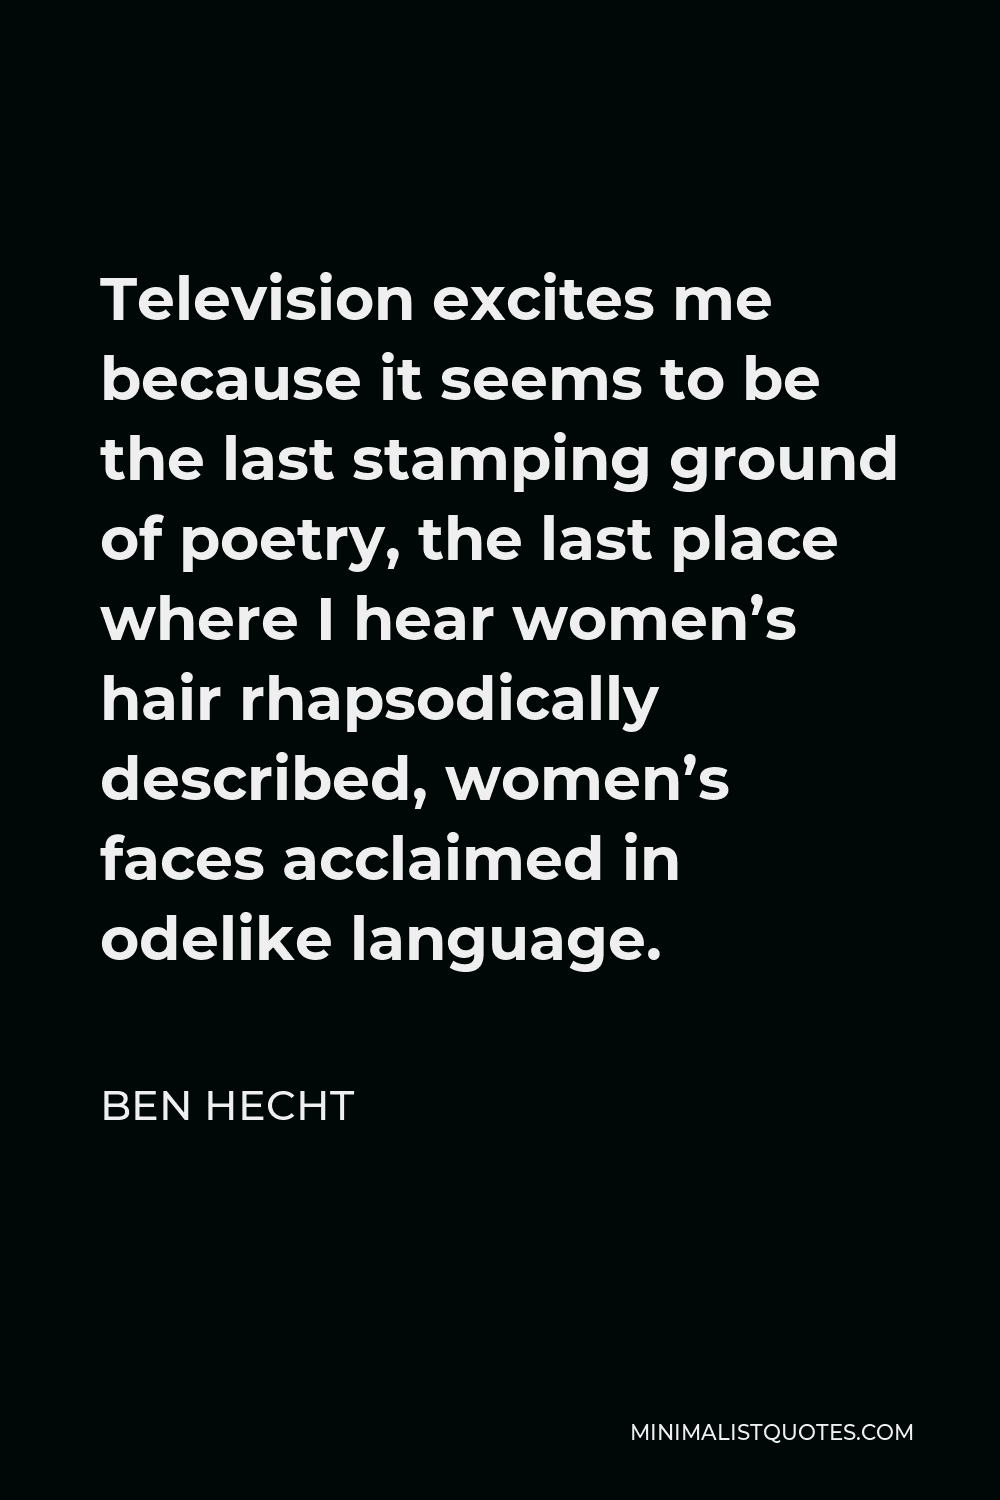 Ben Hecht Quote - Television excites me because it seems to be the last stamping ground of poetry, the last place where I hear women’s hair rhapsodically described, women’s faces acclaimed in odelike language.